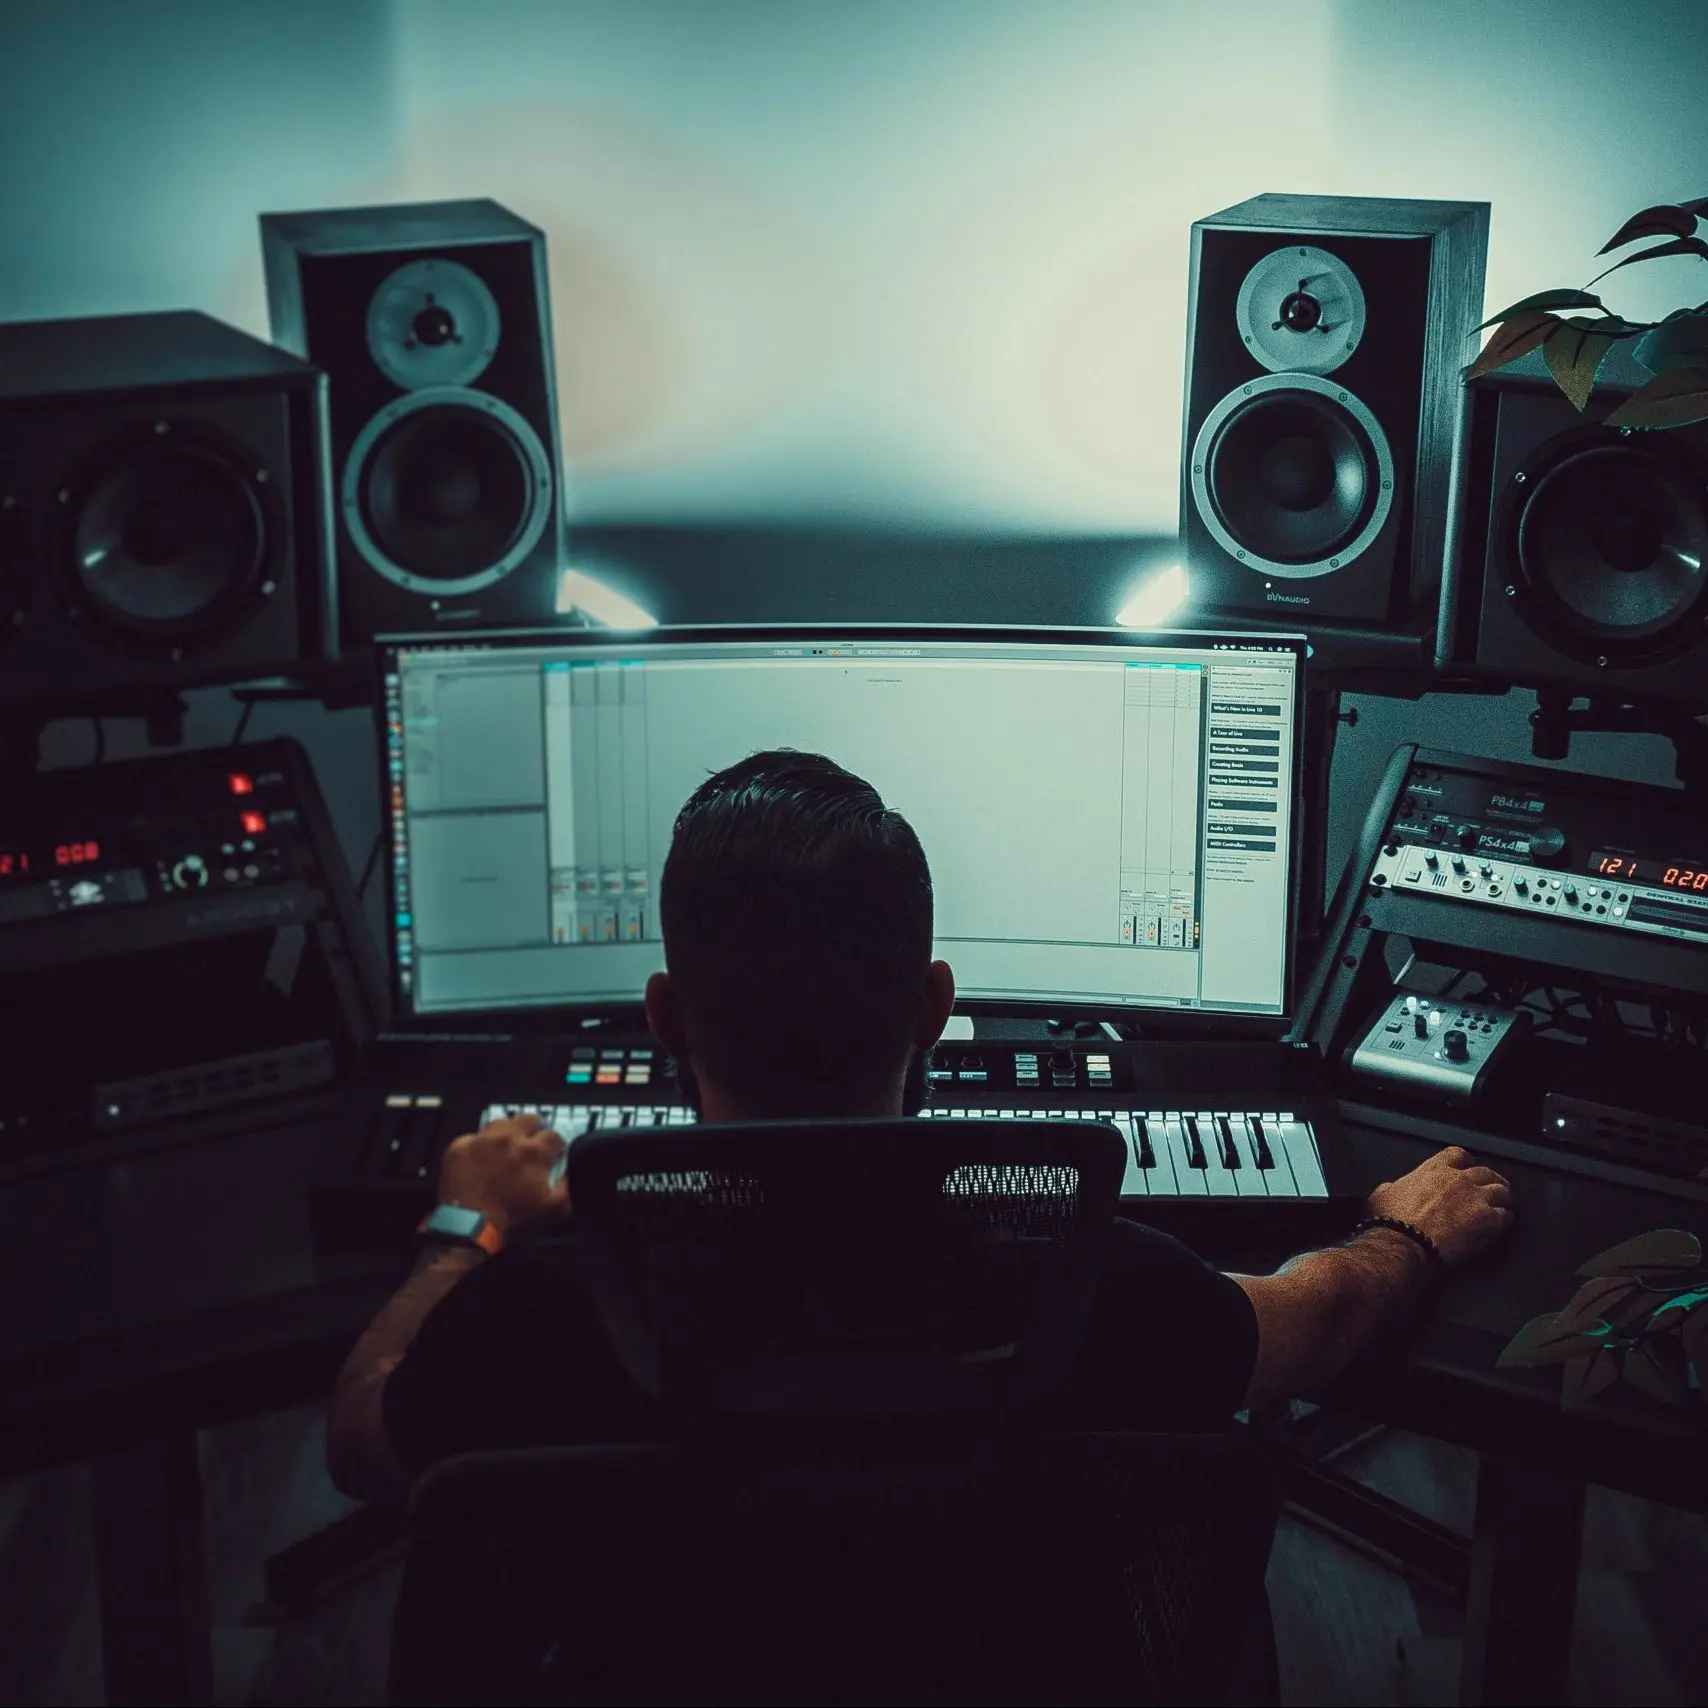 Man sitting in front of a desk with speakers and a large screen doing remote music work.